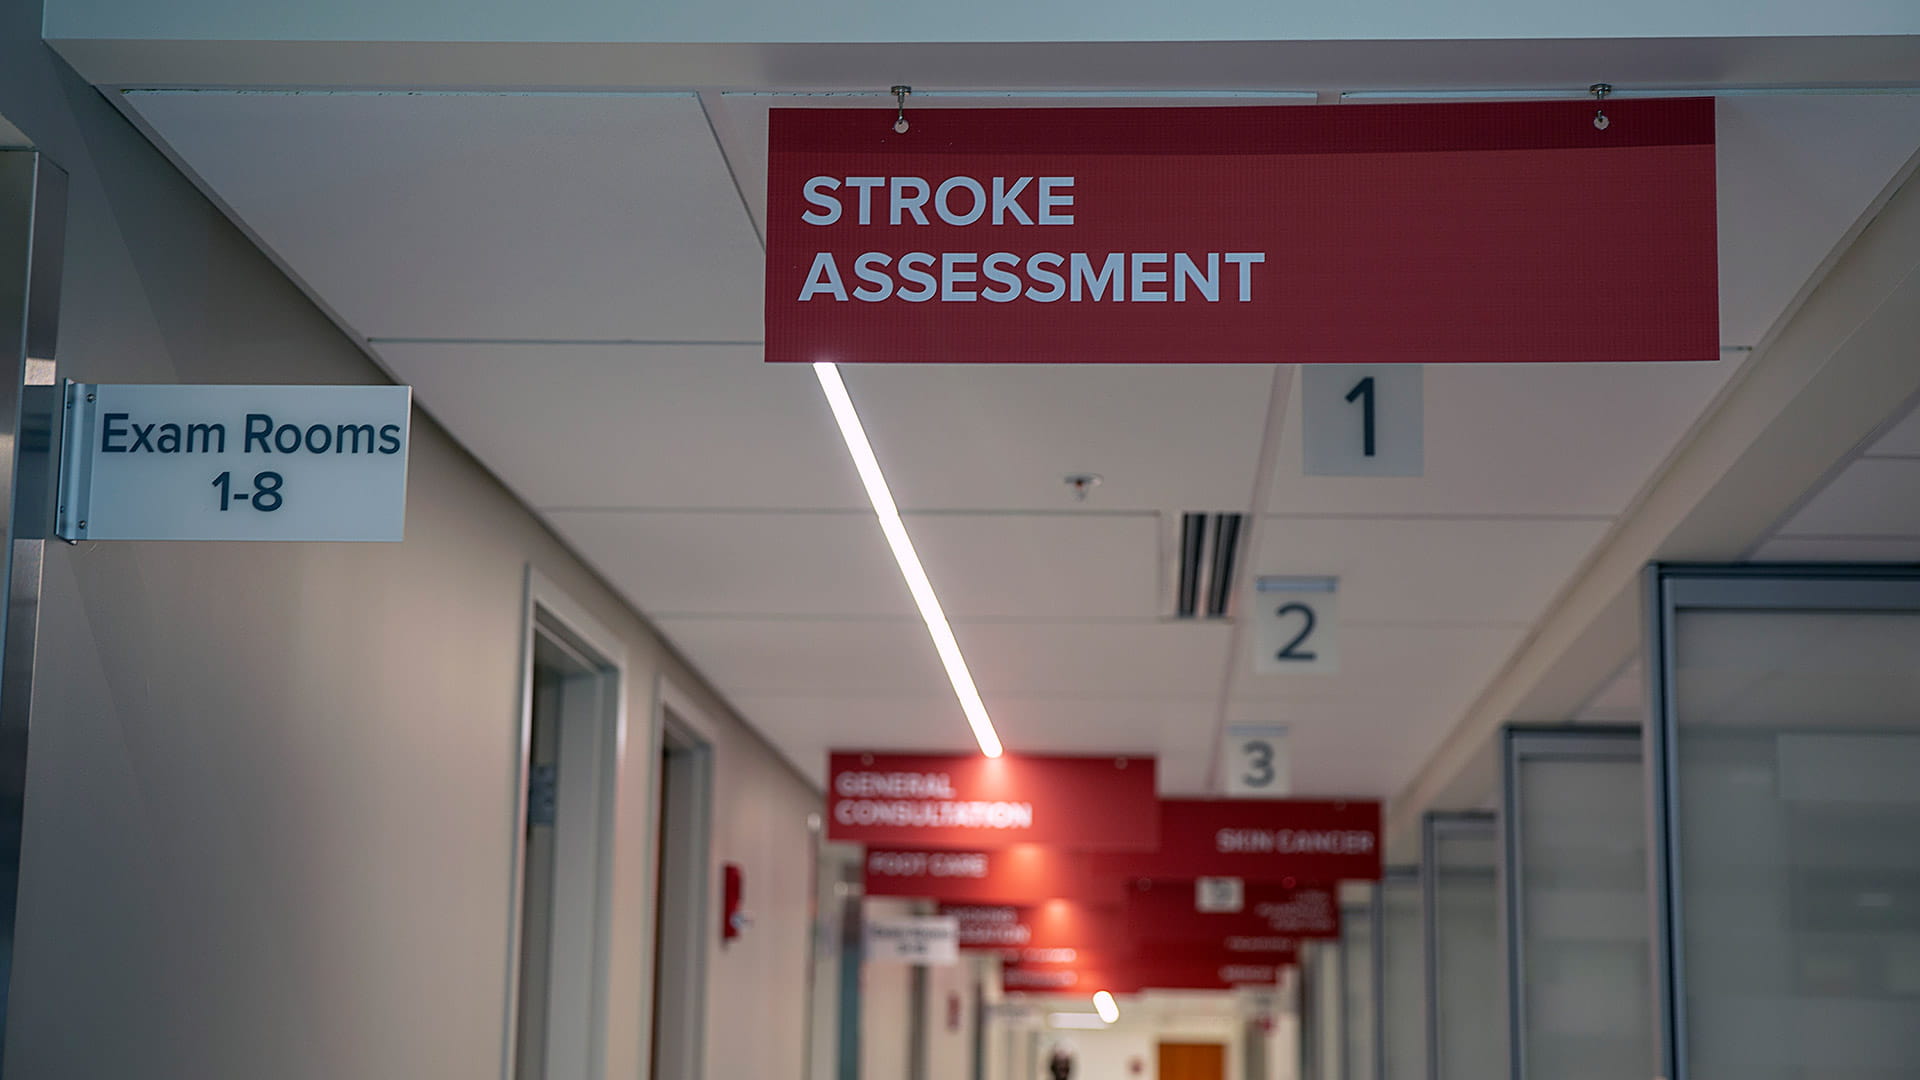 Stroke Assessment sign in the hospital hall